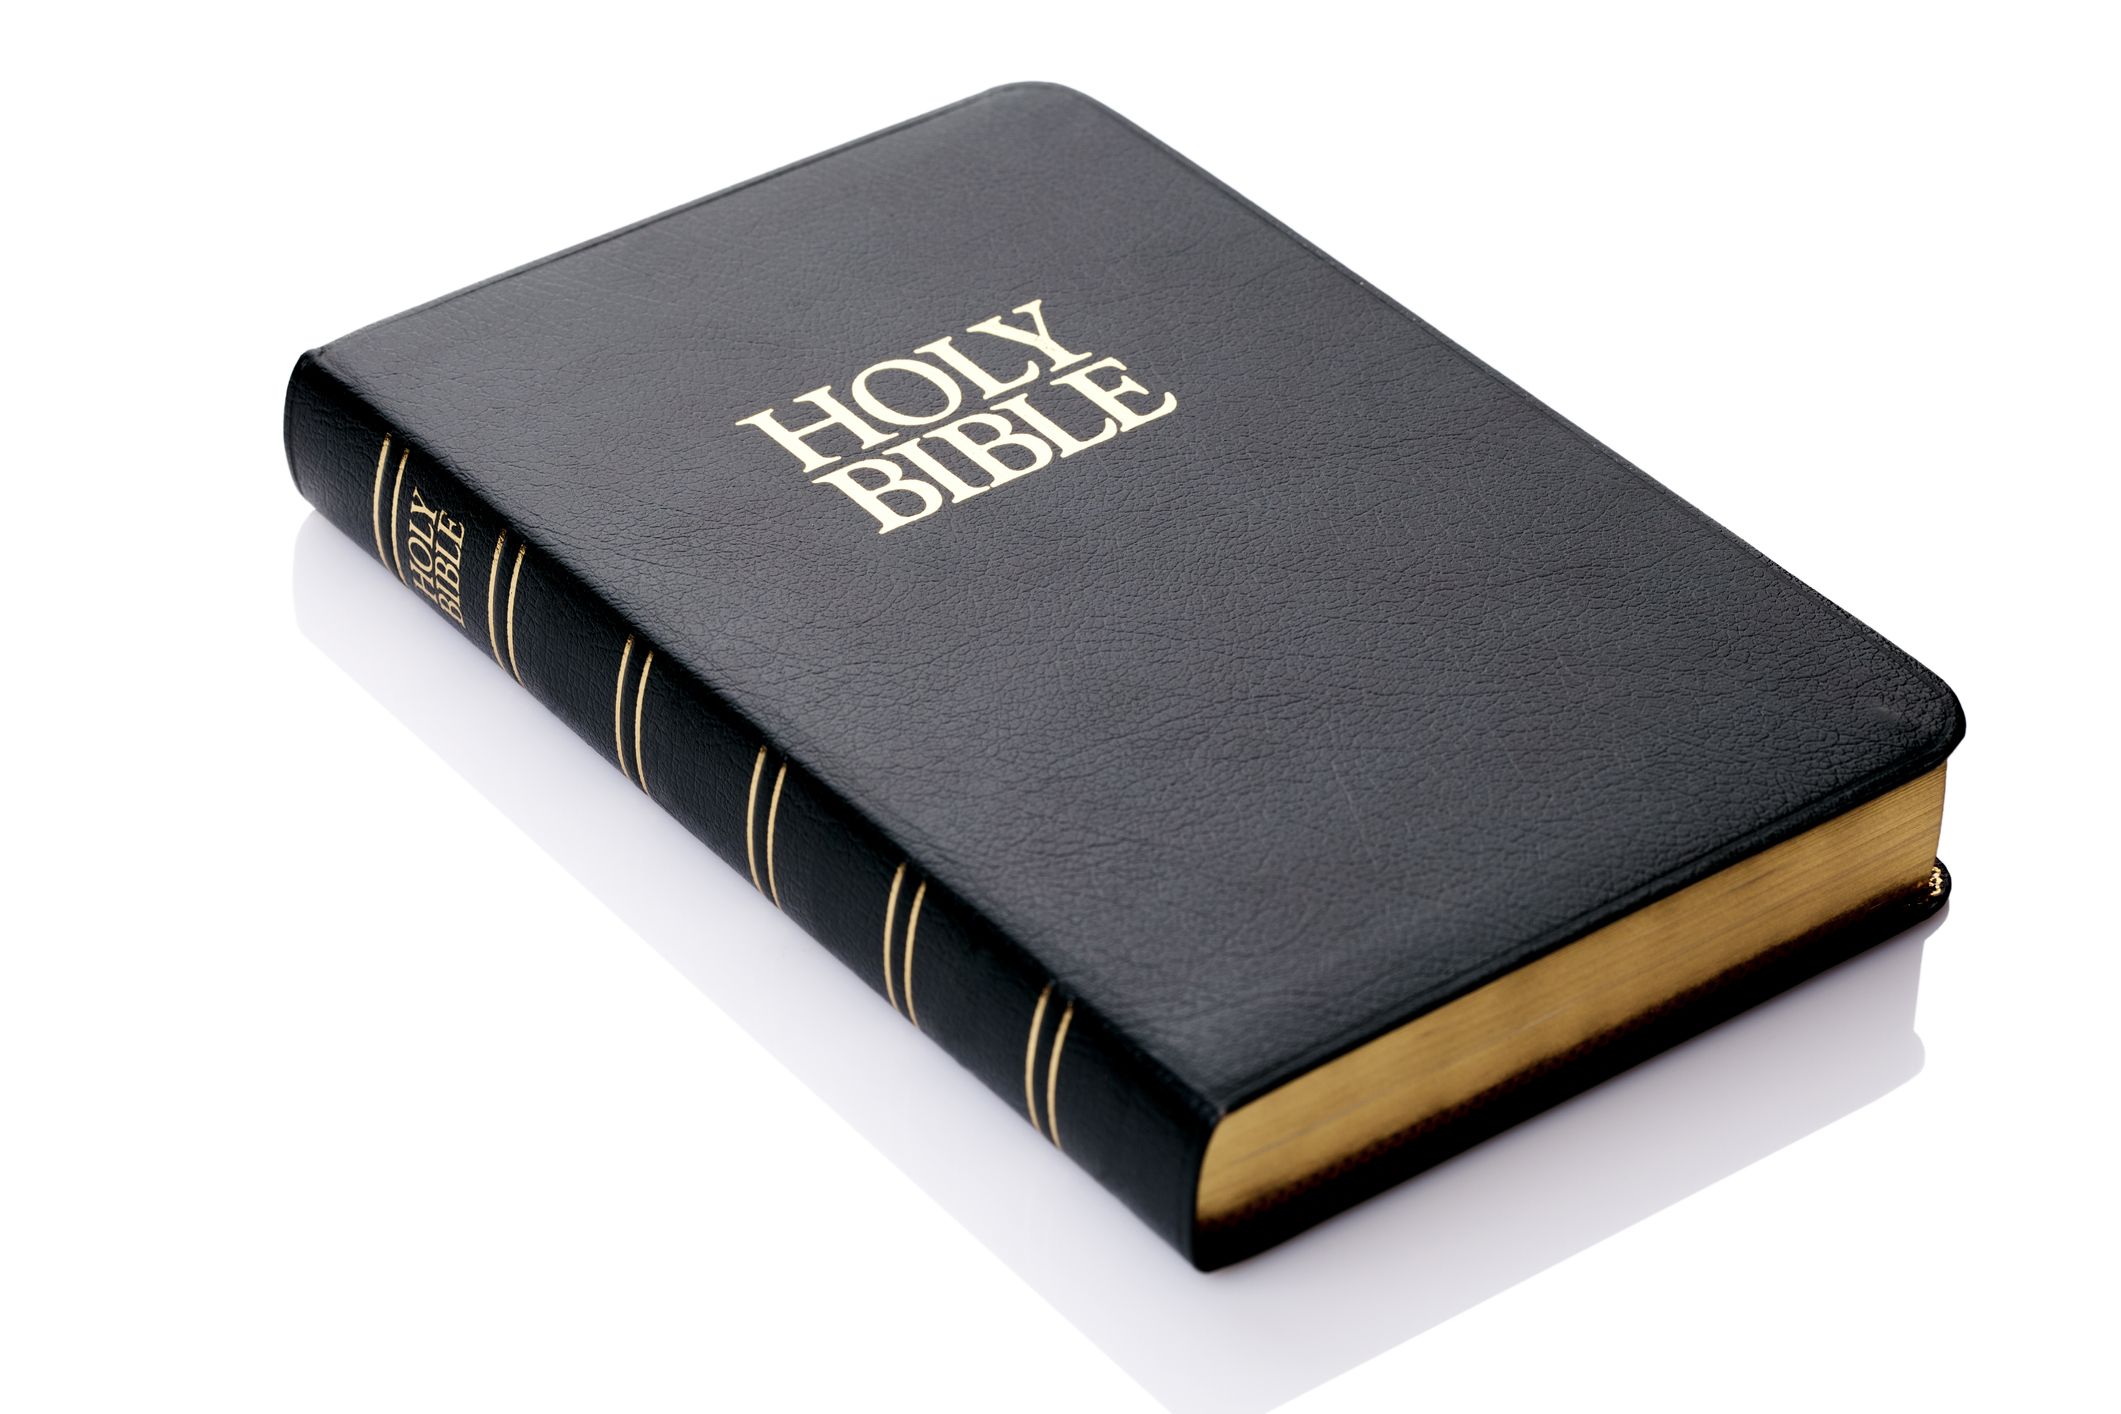 The Holy Bible; Getty Images